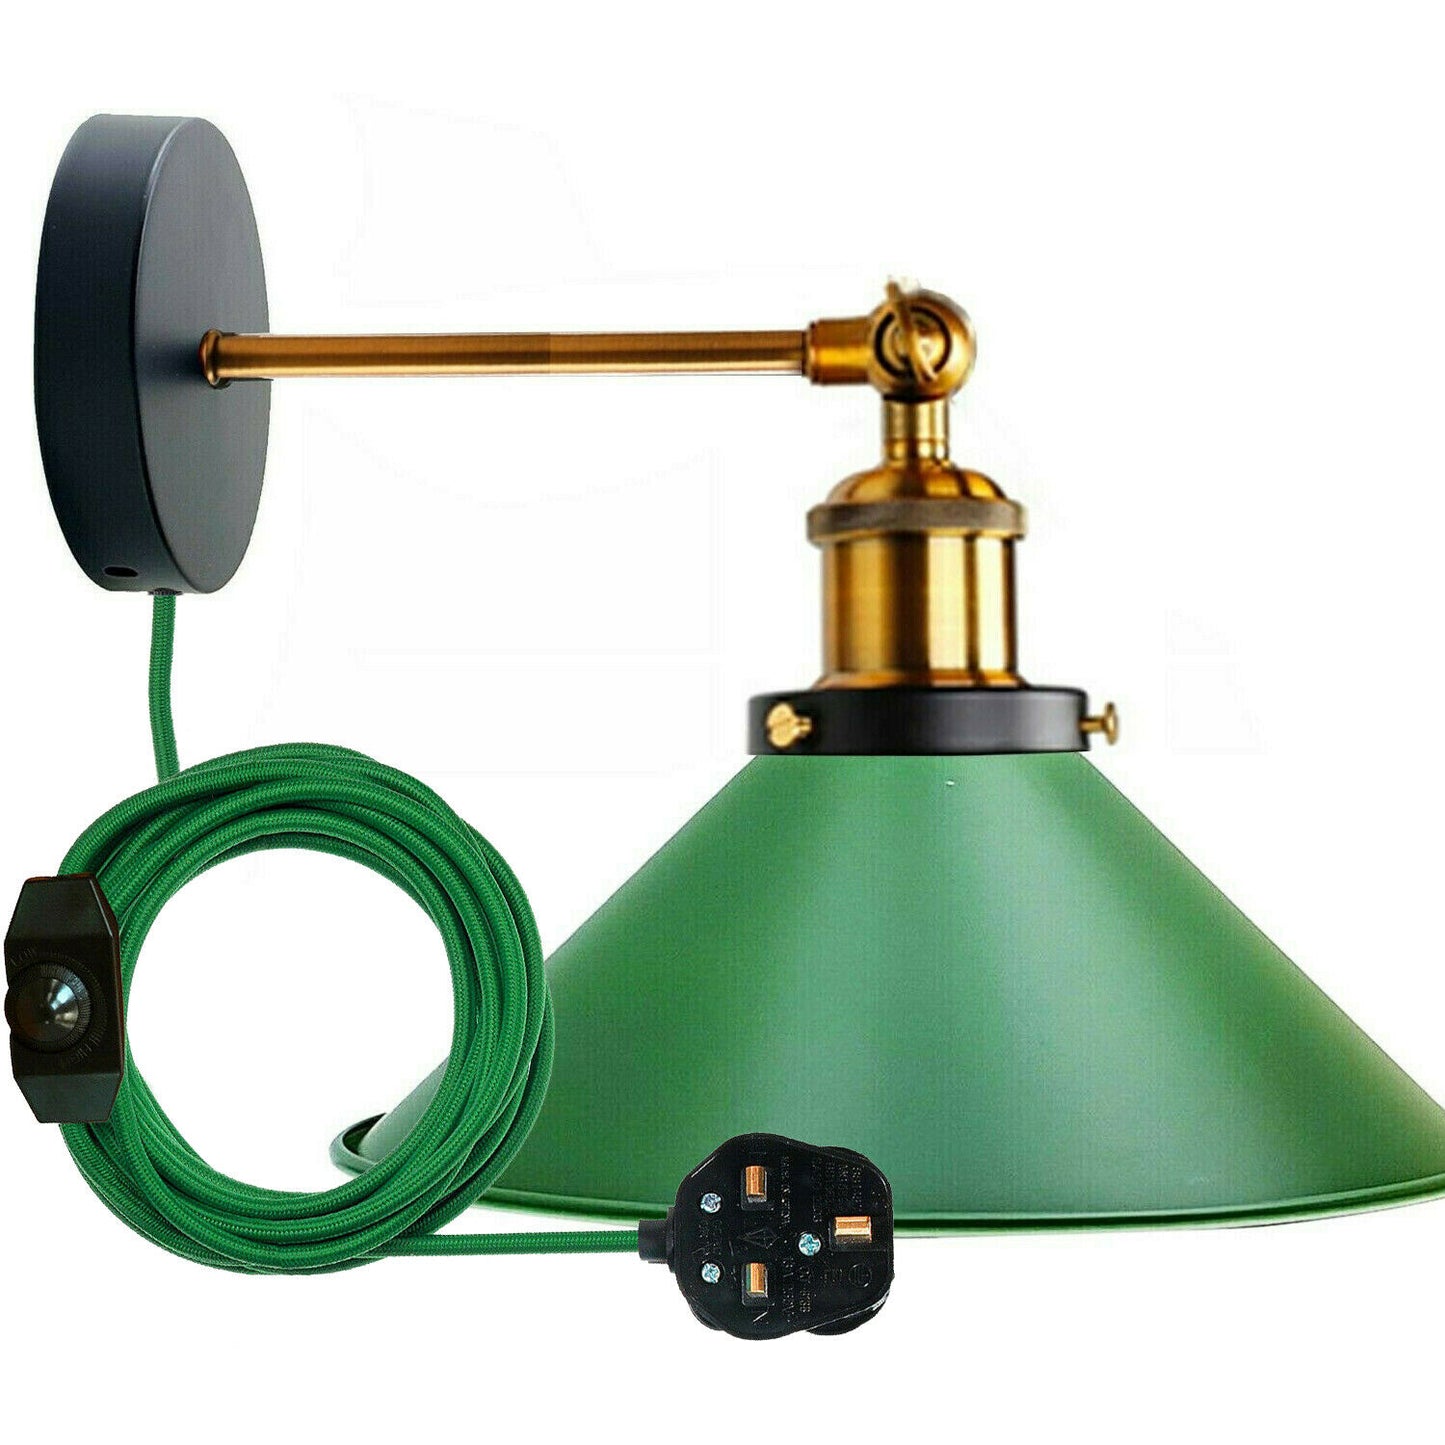 Industrial  Metal Cone Shape Shade Fitting Plug in Wall Light With Dimmer Switch~2275